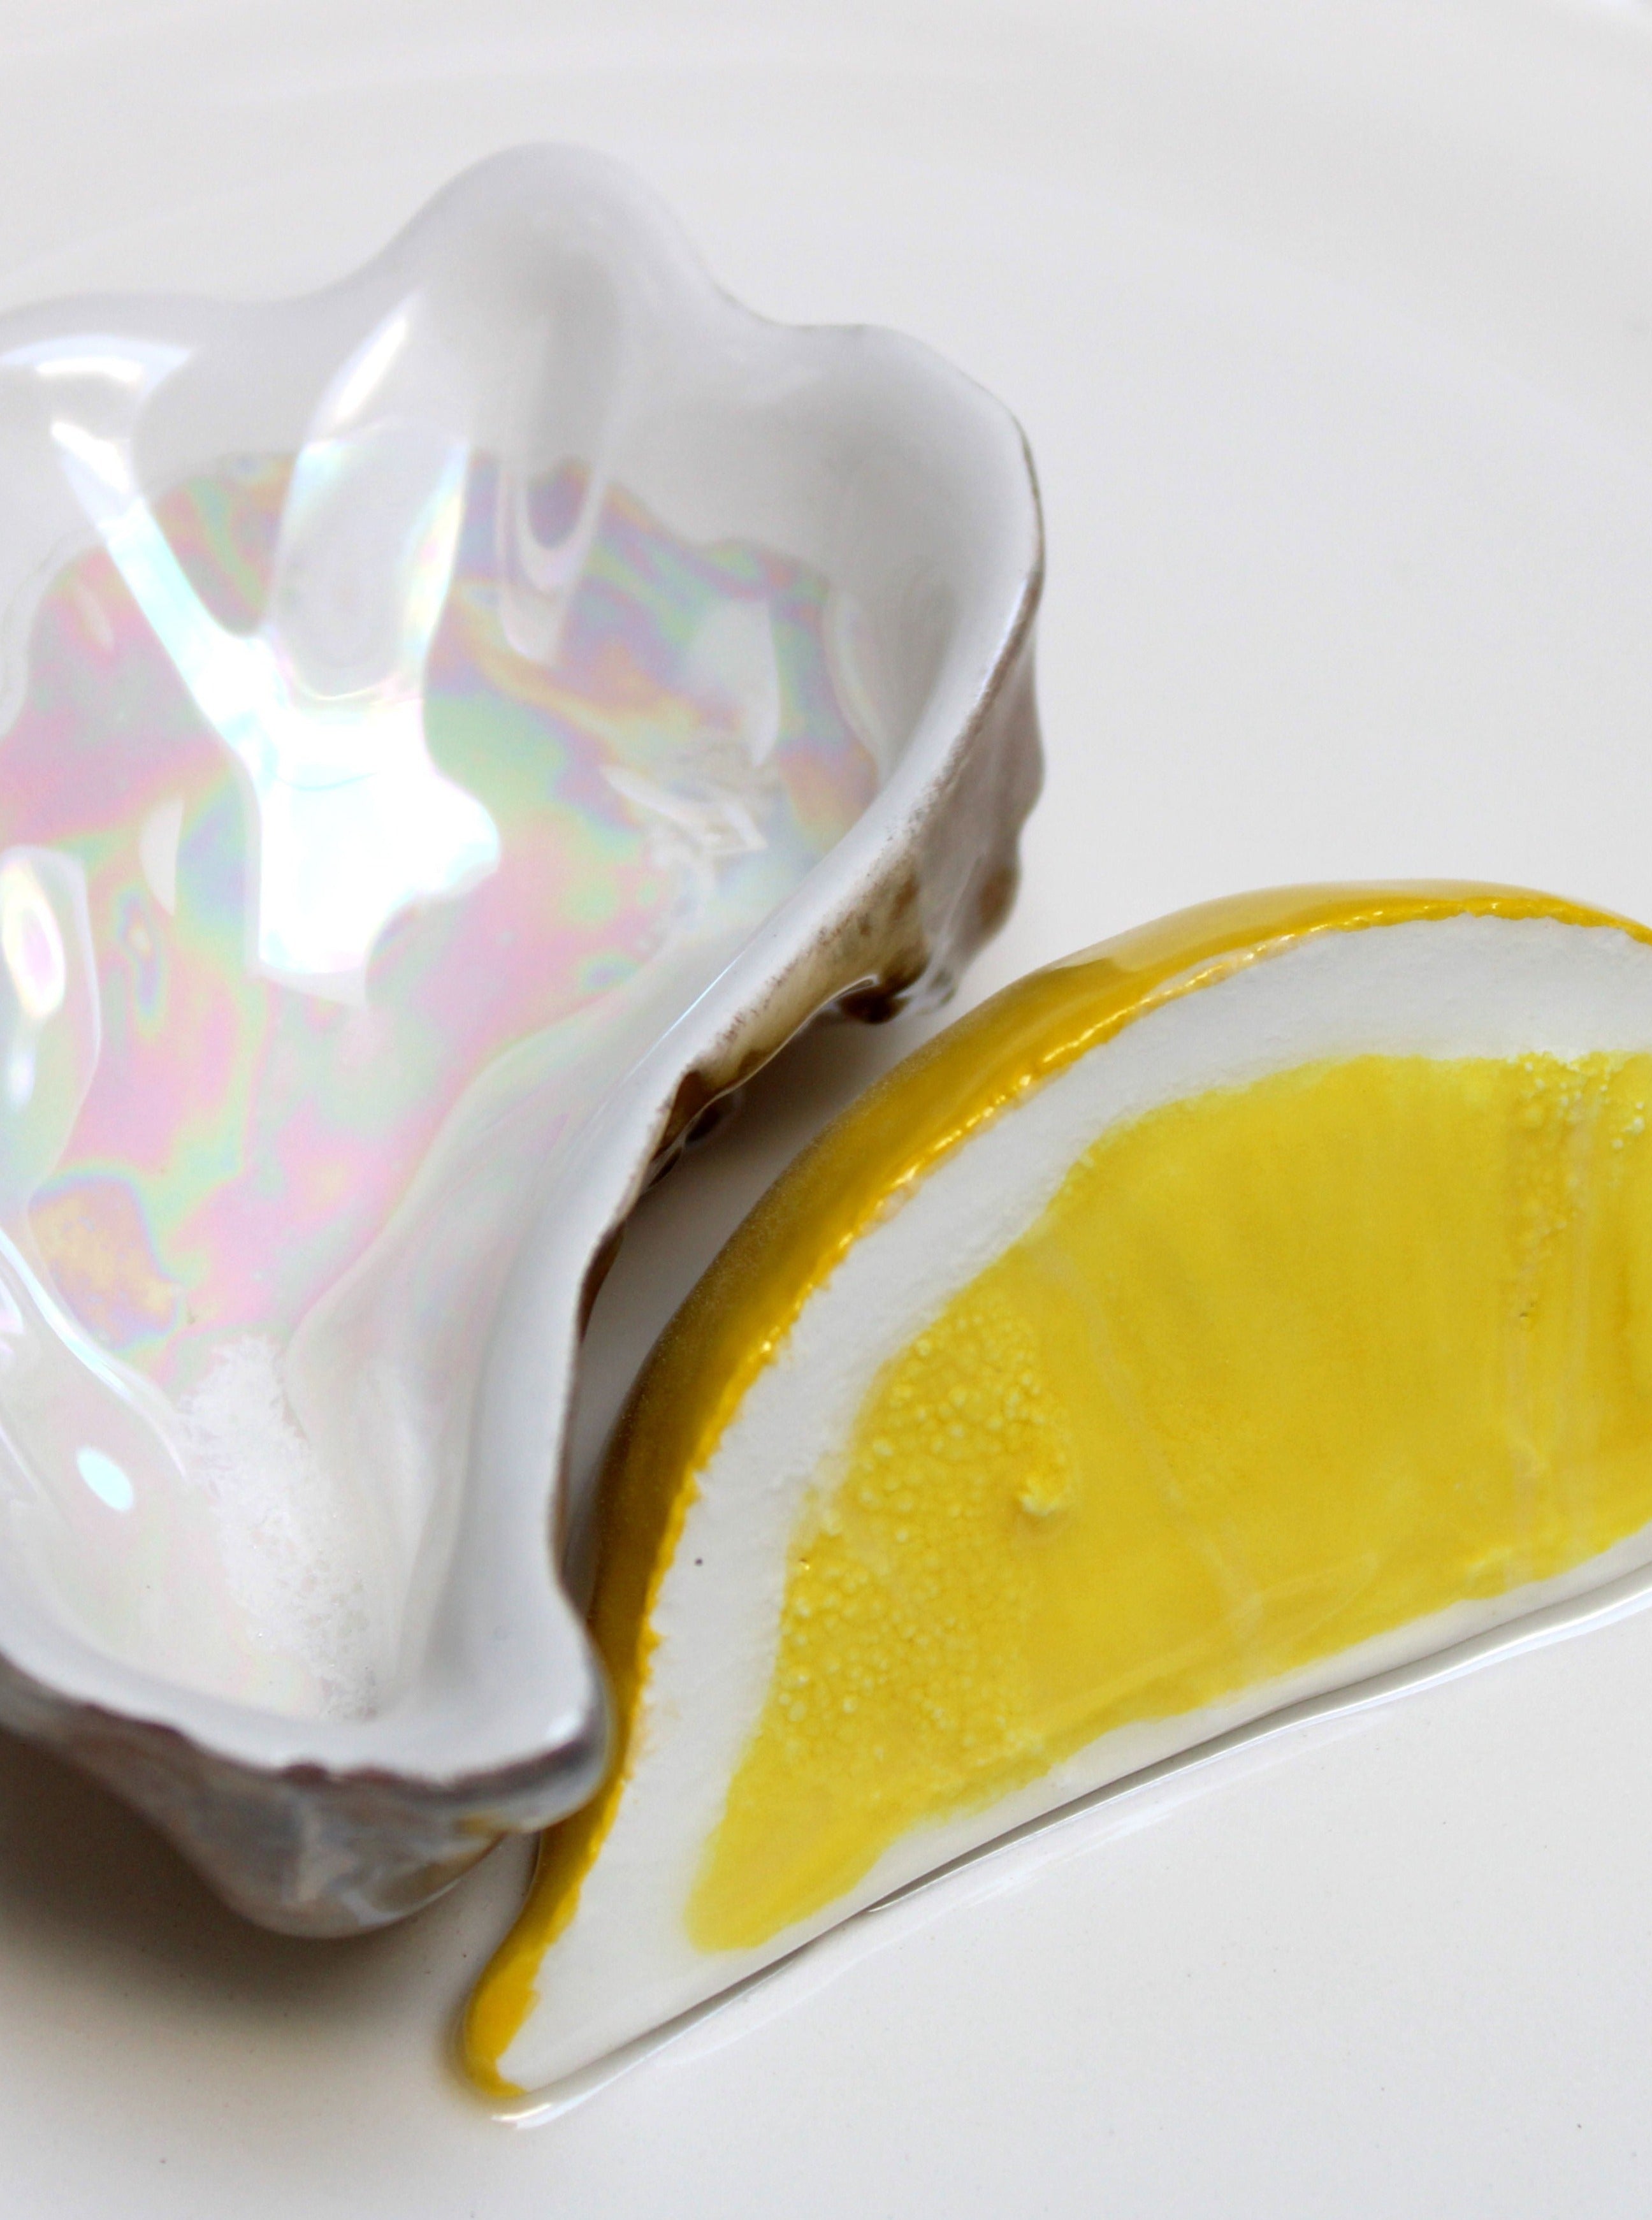 A close-up image of a pearlescent shell with an iridescent interior next to a slice of lemon with water droplets on its surface, placed on a Villa Arev Plaisir Solitaire Ashtray